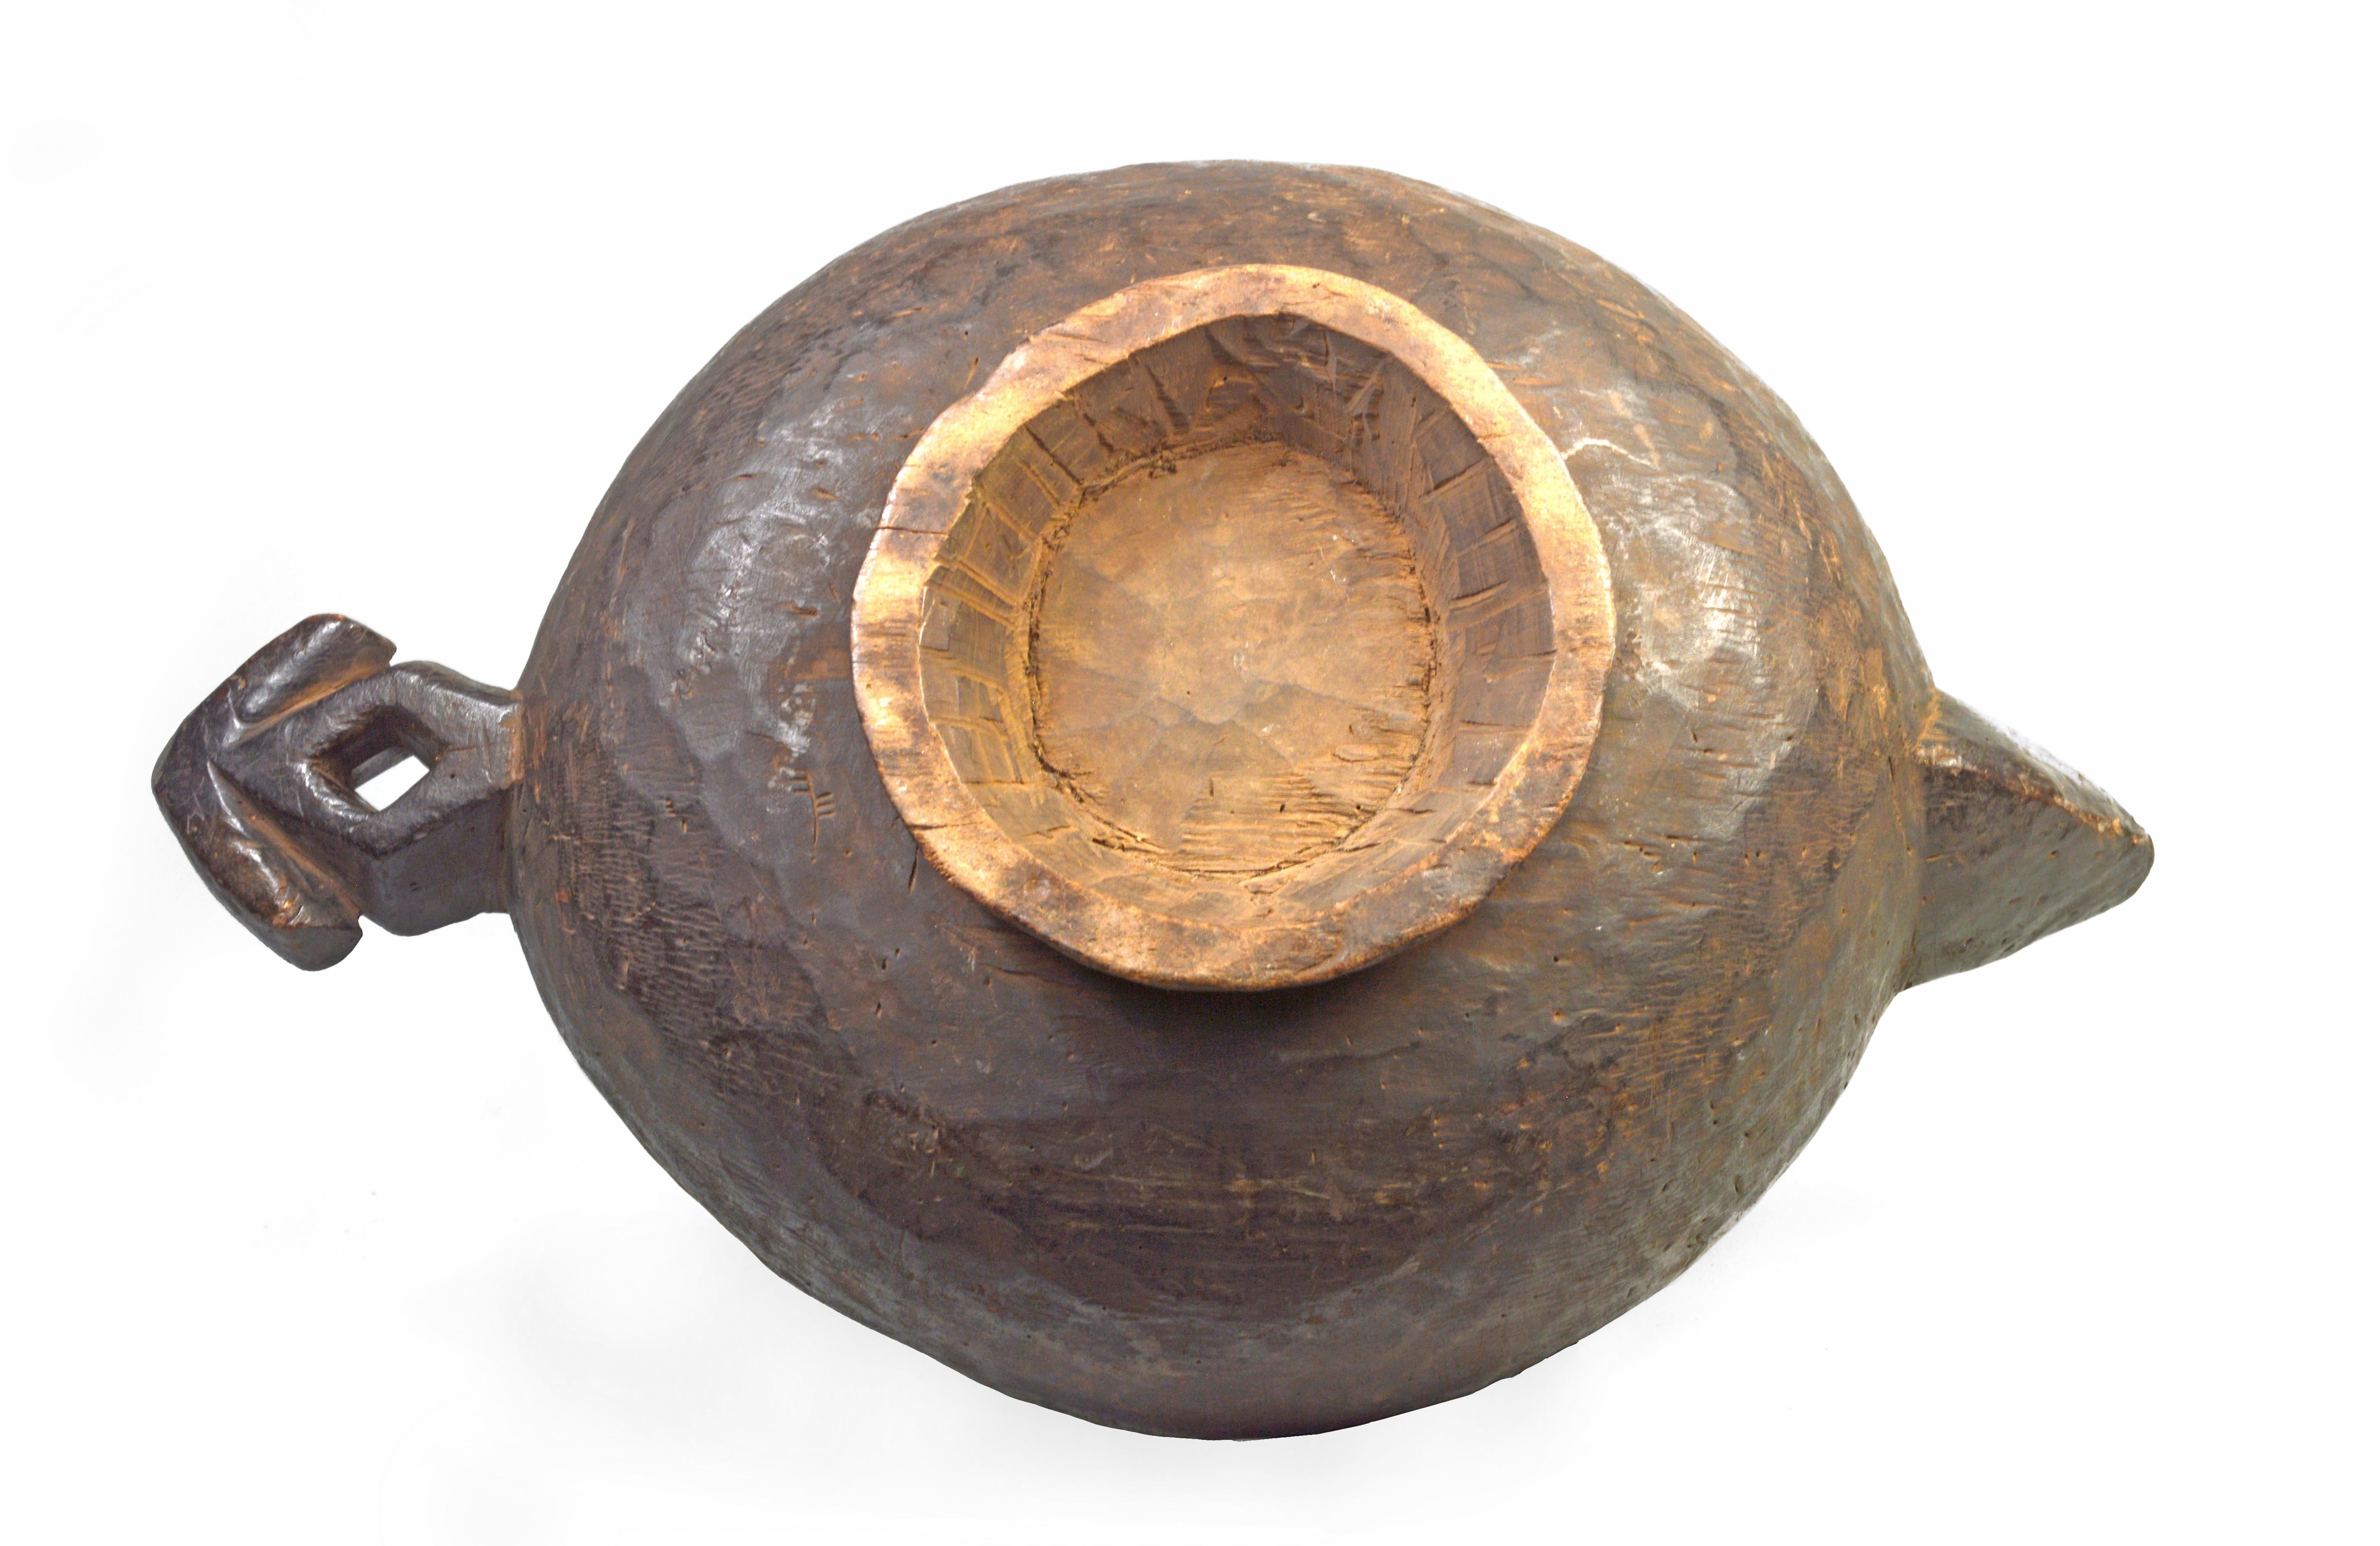 Large, early- to mid-twentieth century serving bowl from the Grassfields region of Cameroon. The Grassfields region of Cameroon sits at an altitude in the country's northwest. The region is inhabited by a number of related ethnic groups, among them